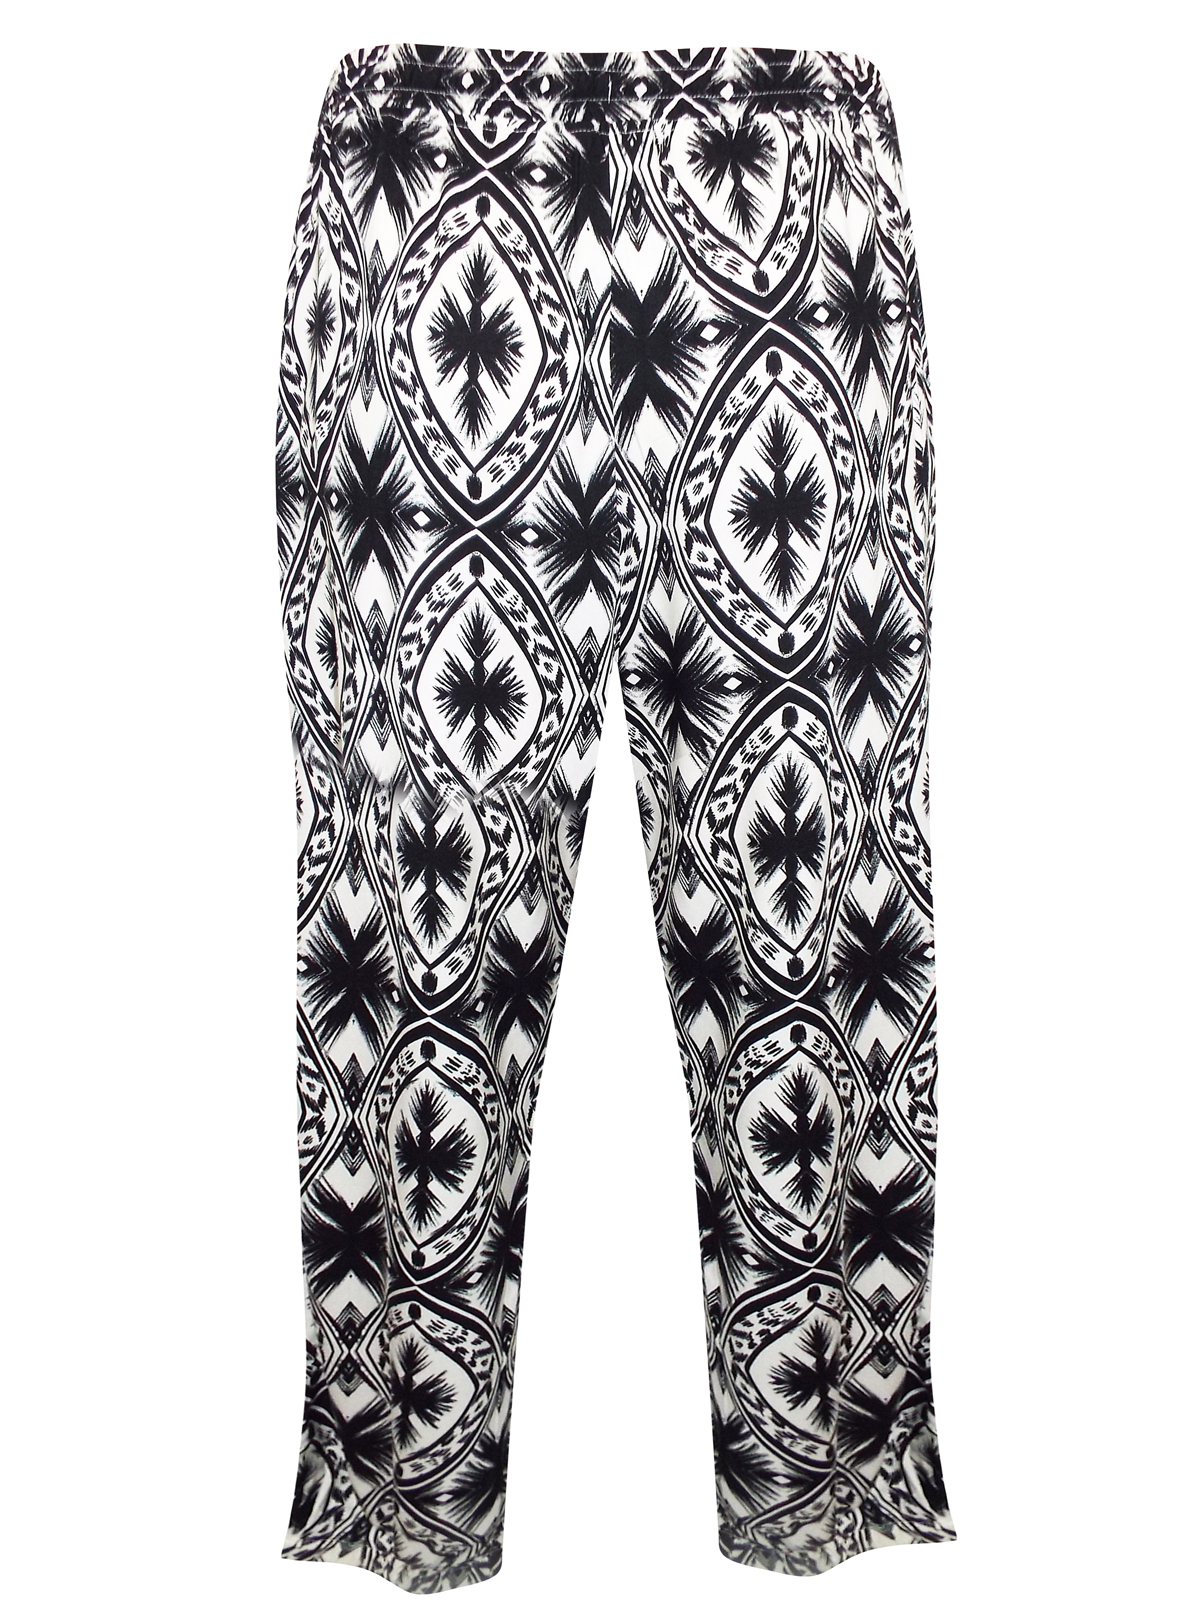 Label Be - - LabelBe MONO Printed Harem Joggers - Plus Size 24 to 30